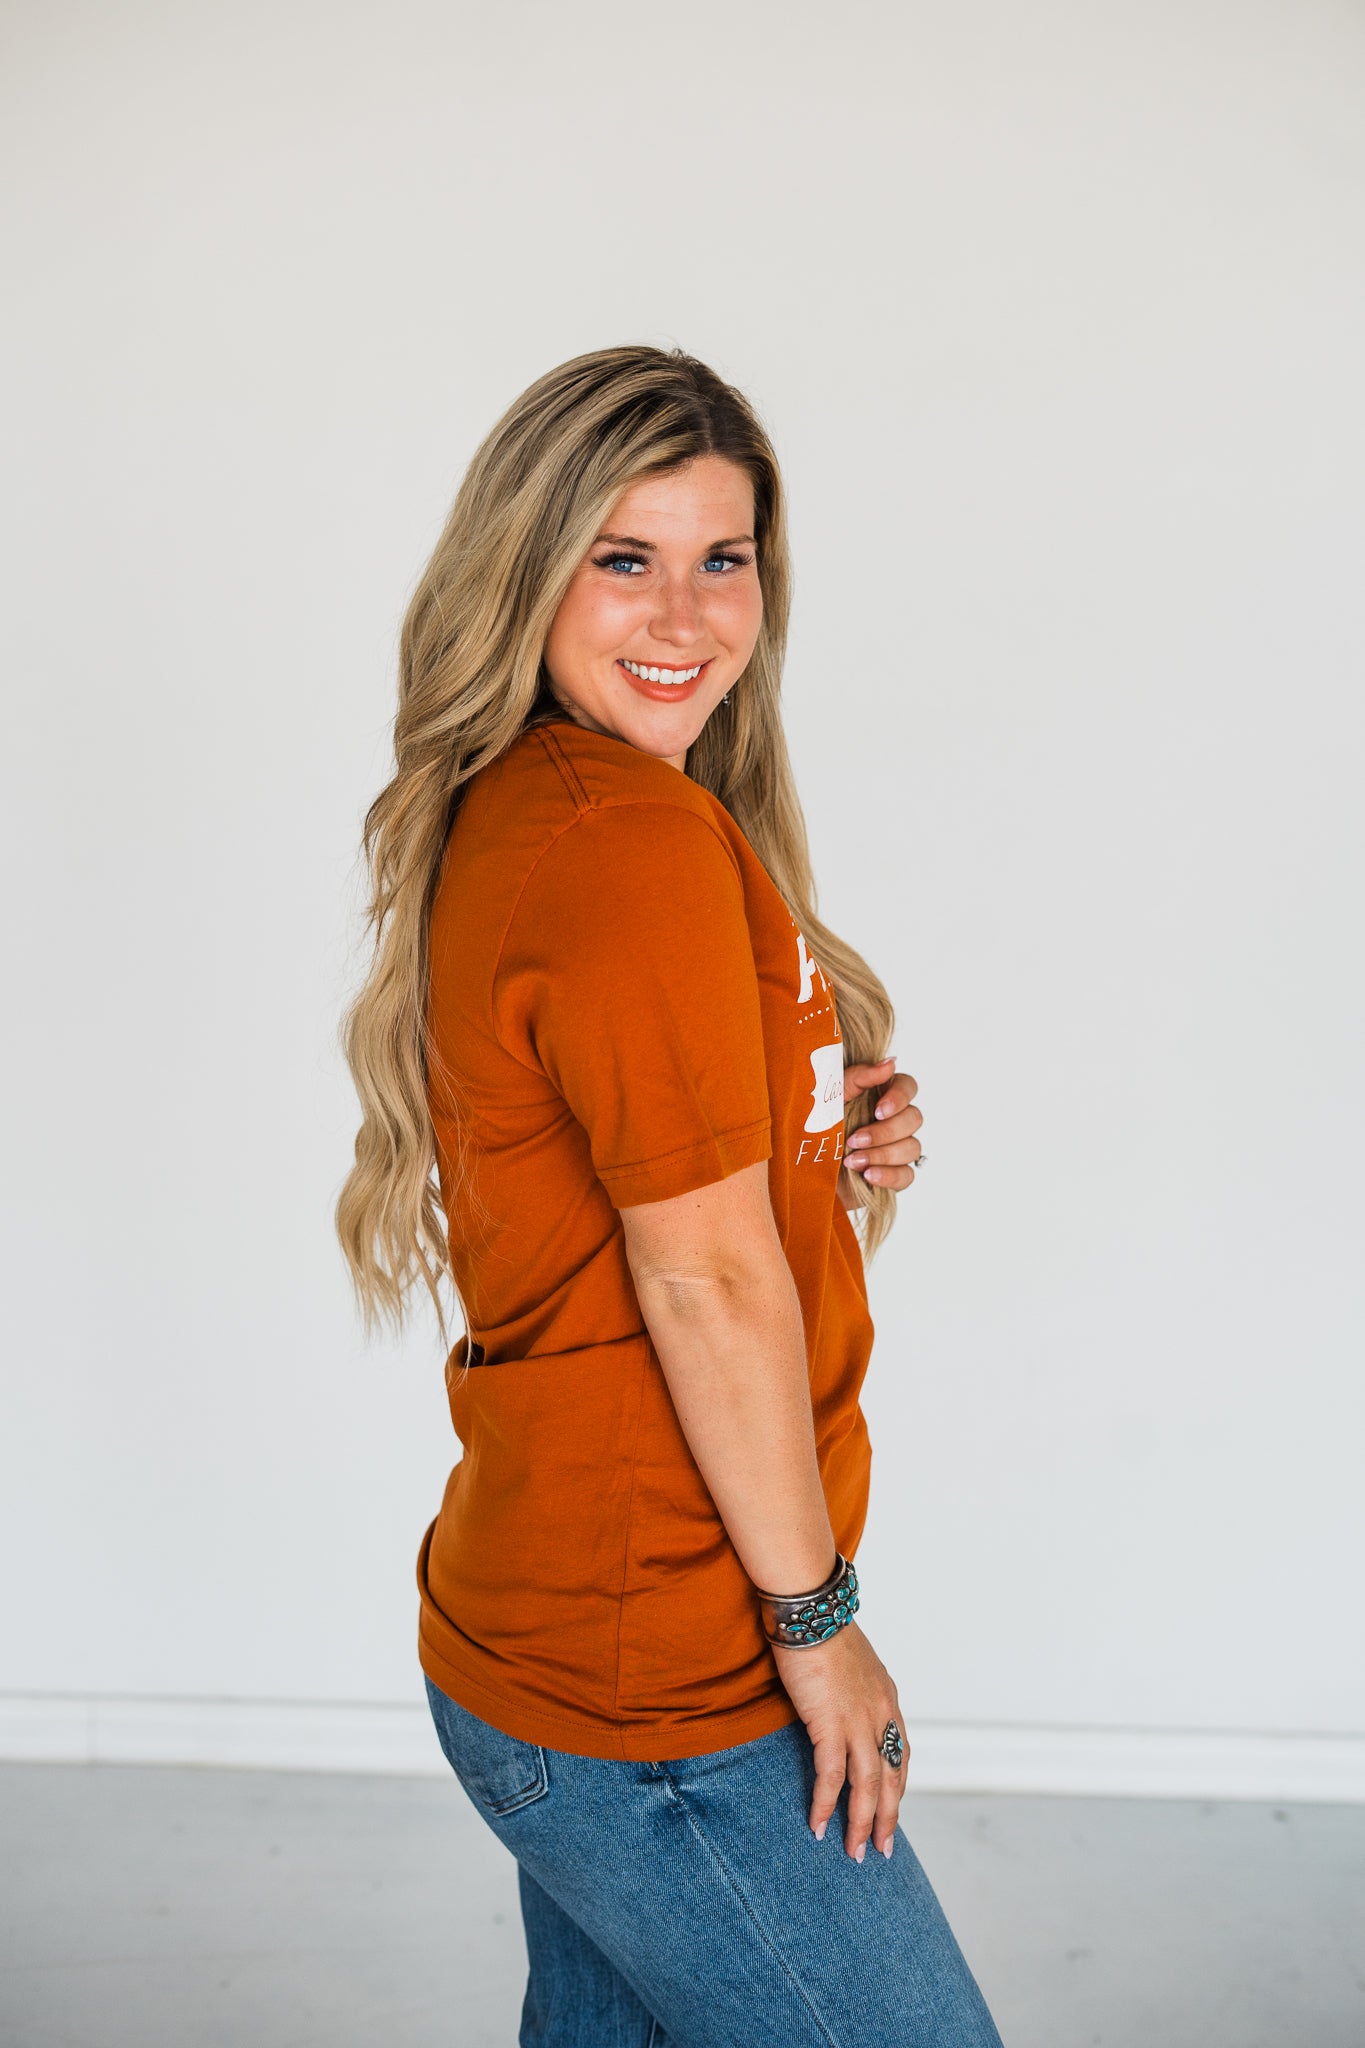 "Love The Land, Care For The Community, Feed The People " FarmHer Graphic Tee (Rust Orange)